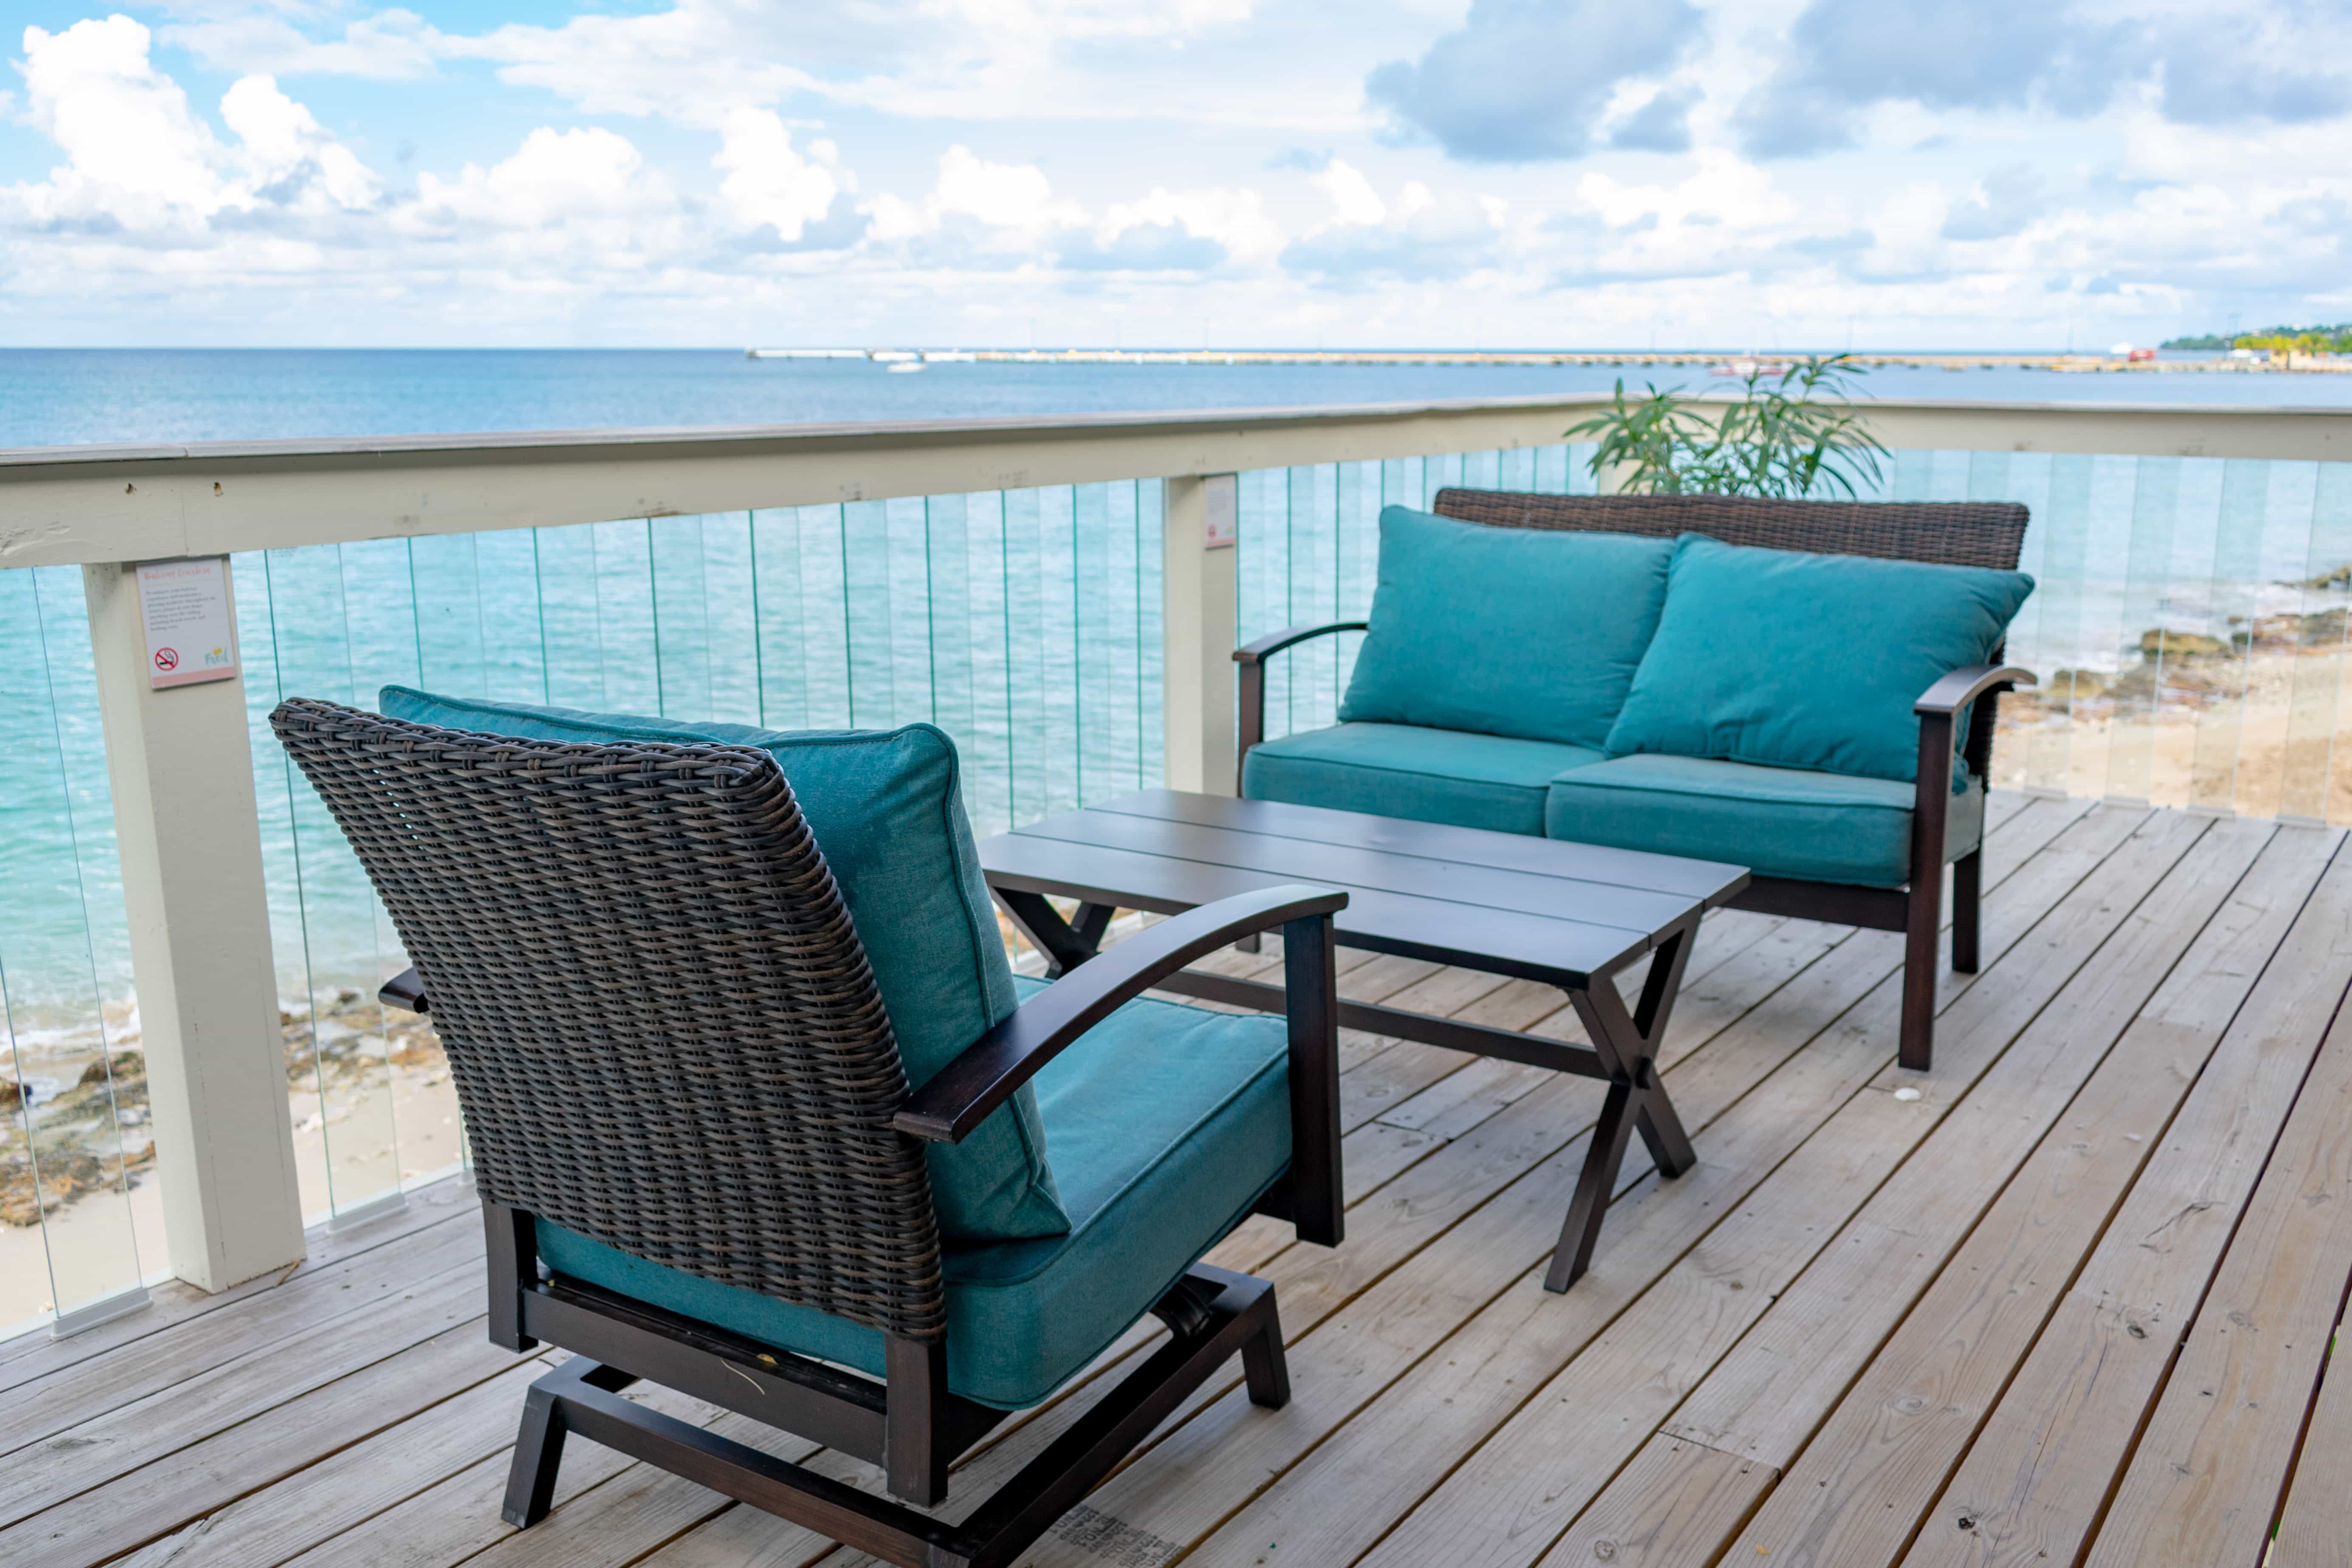 Check out these Comfy chairs and clear balusters that allow for unobstructed views from your balcony.